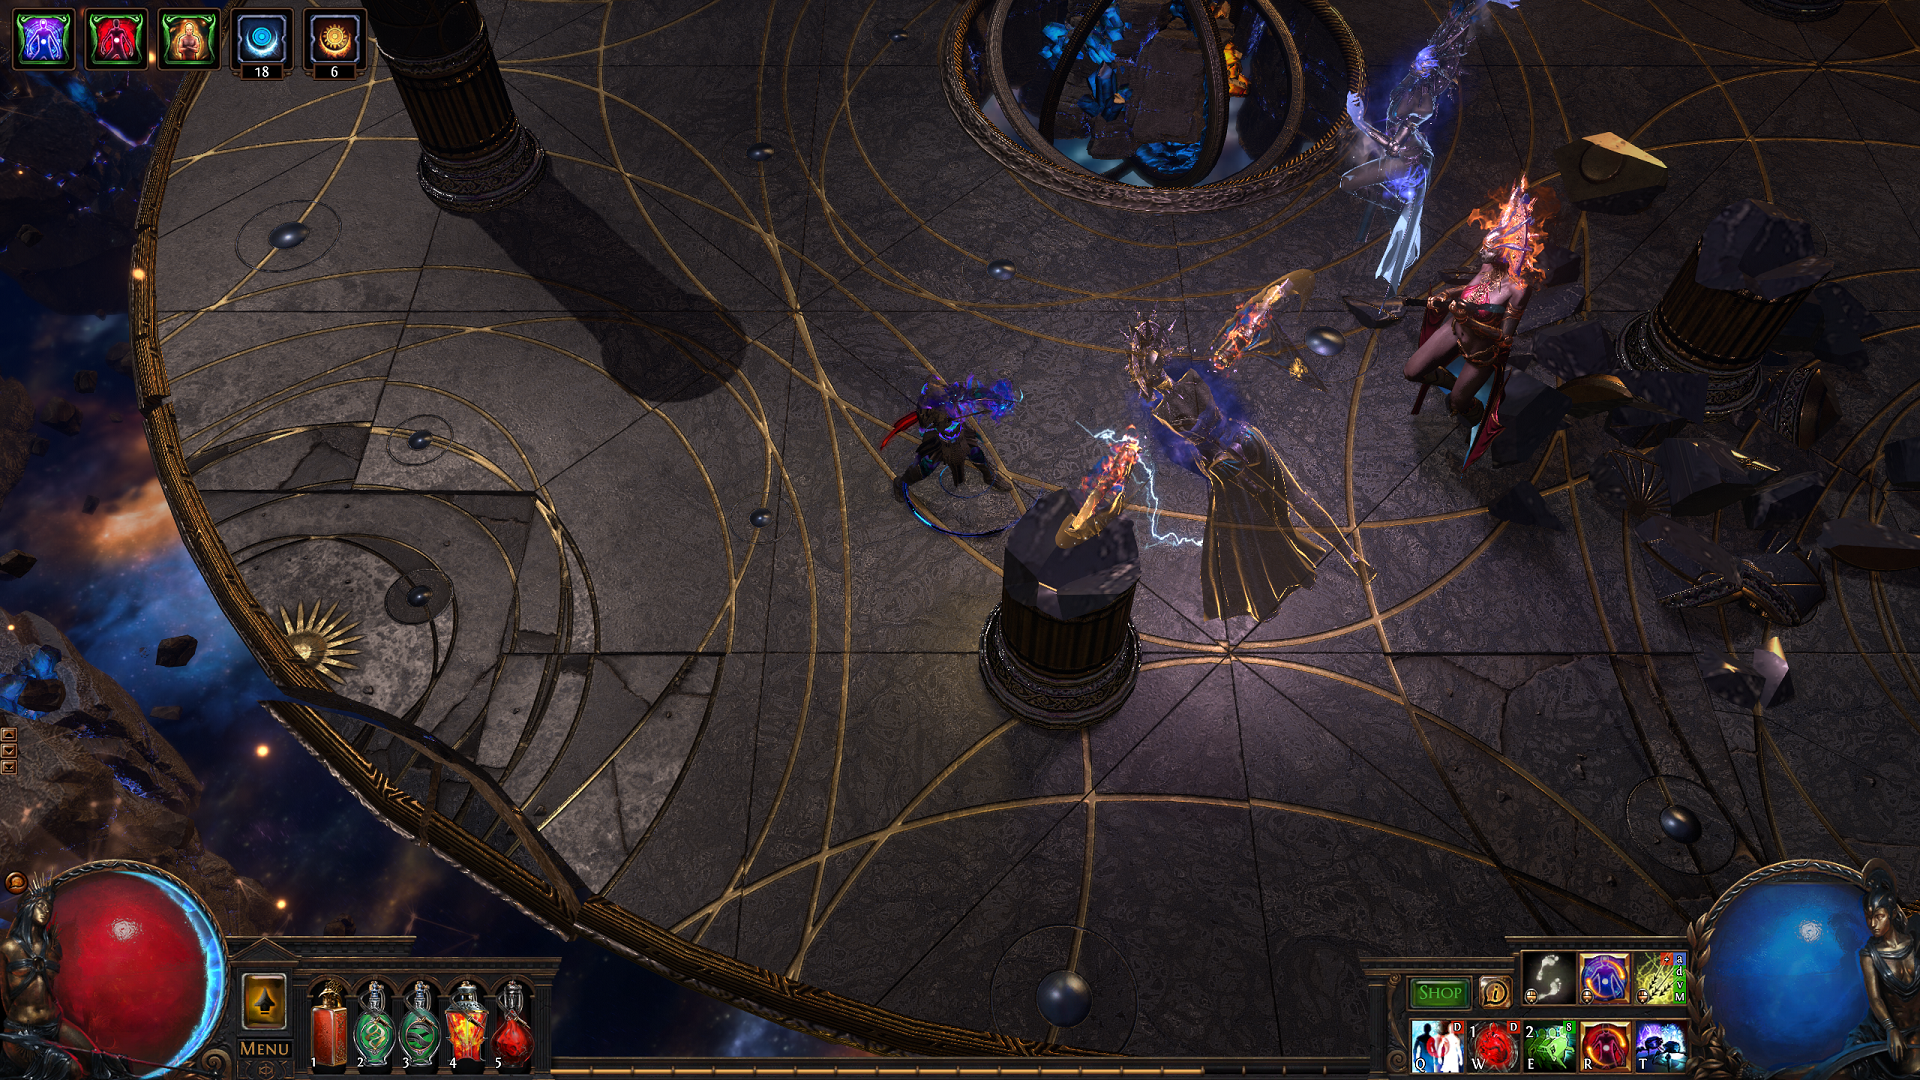 A boss fight in Path of Exile: Siege of the Atlas